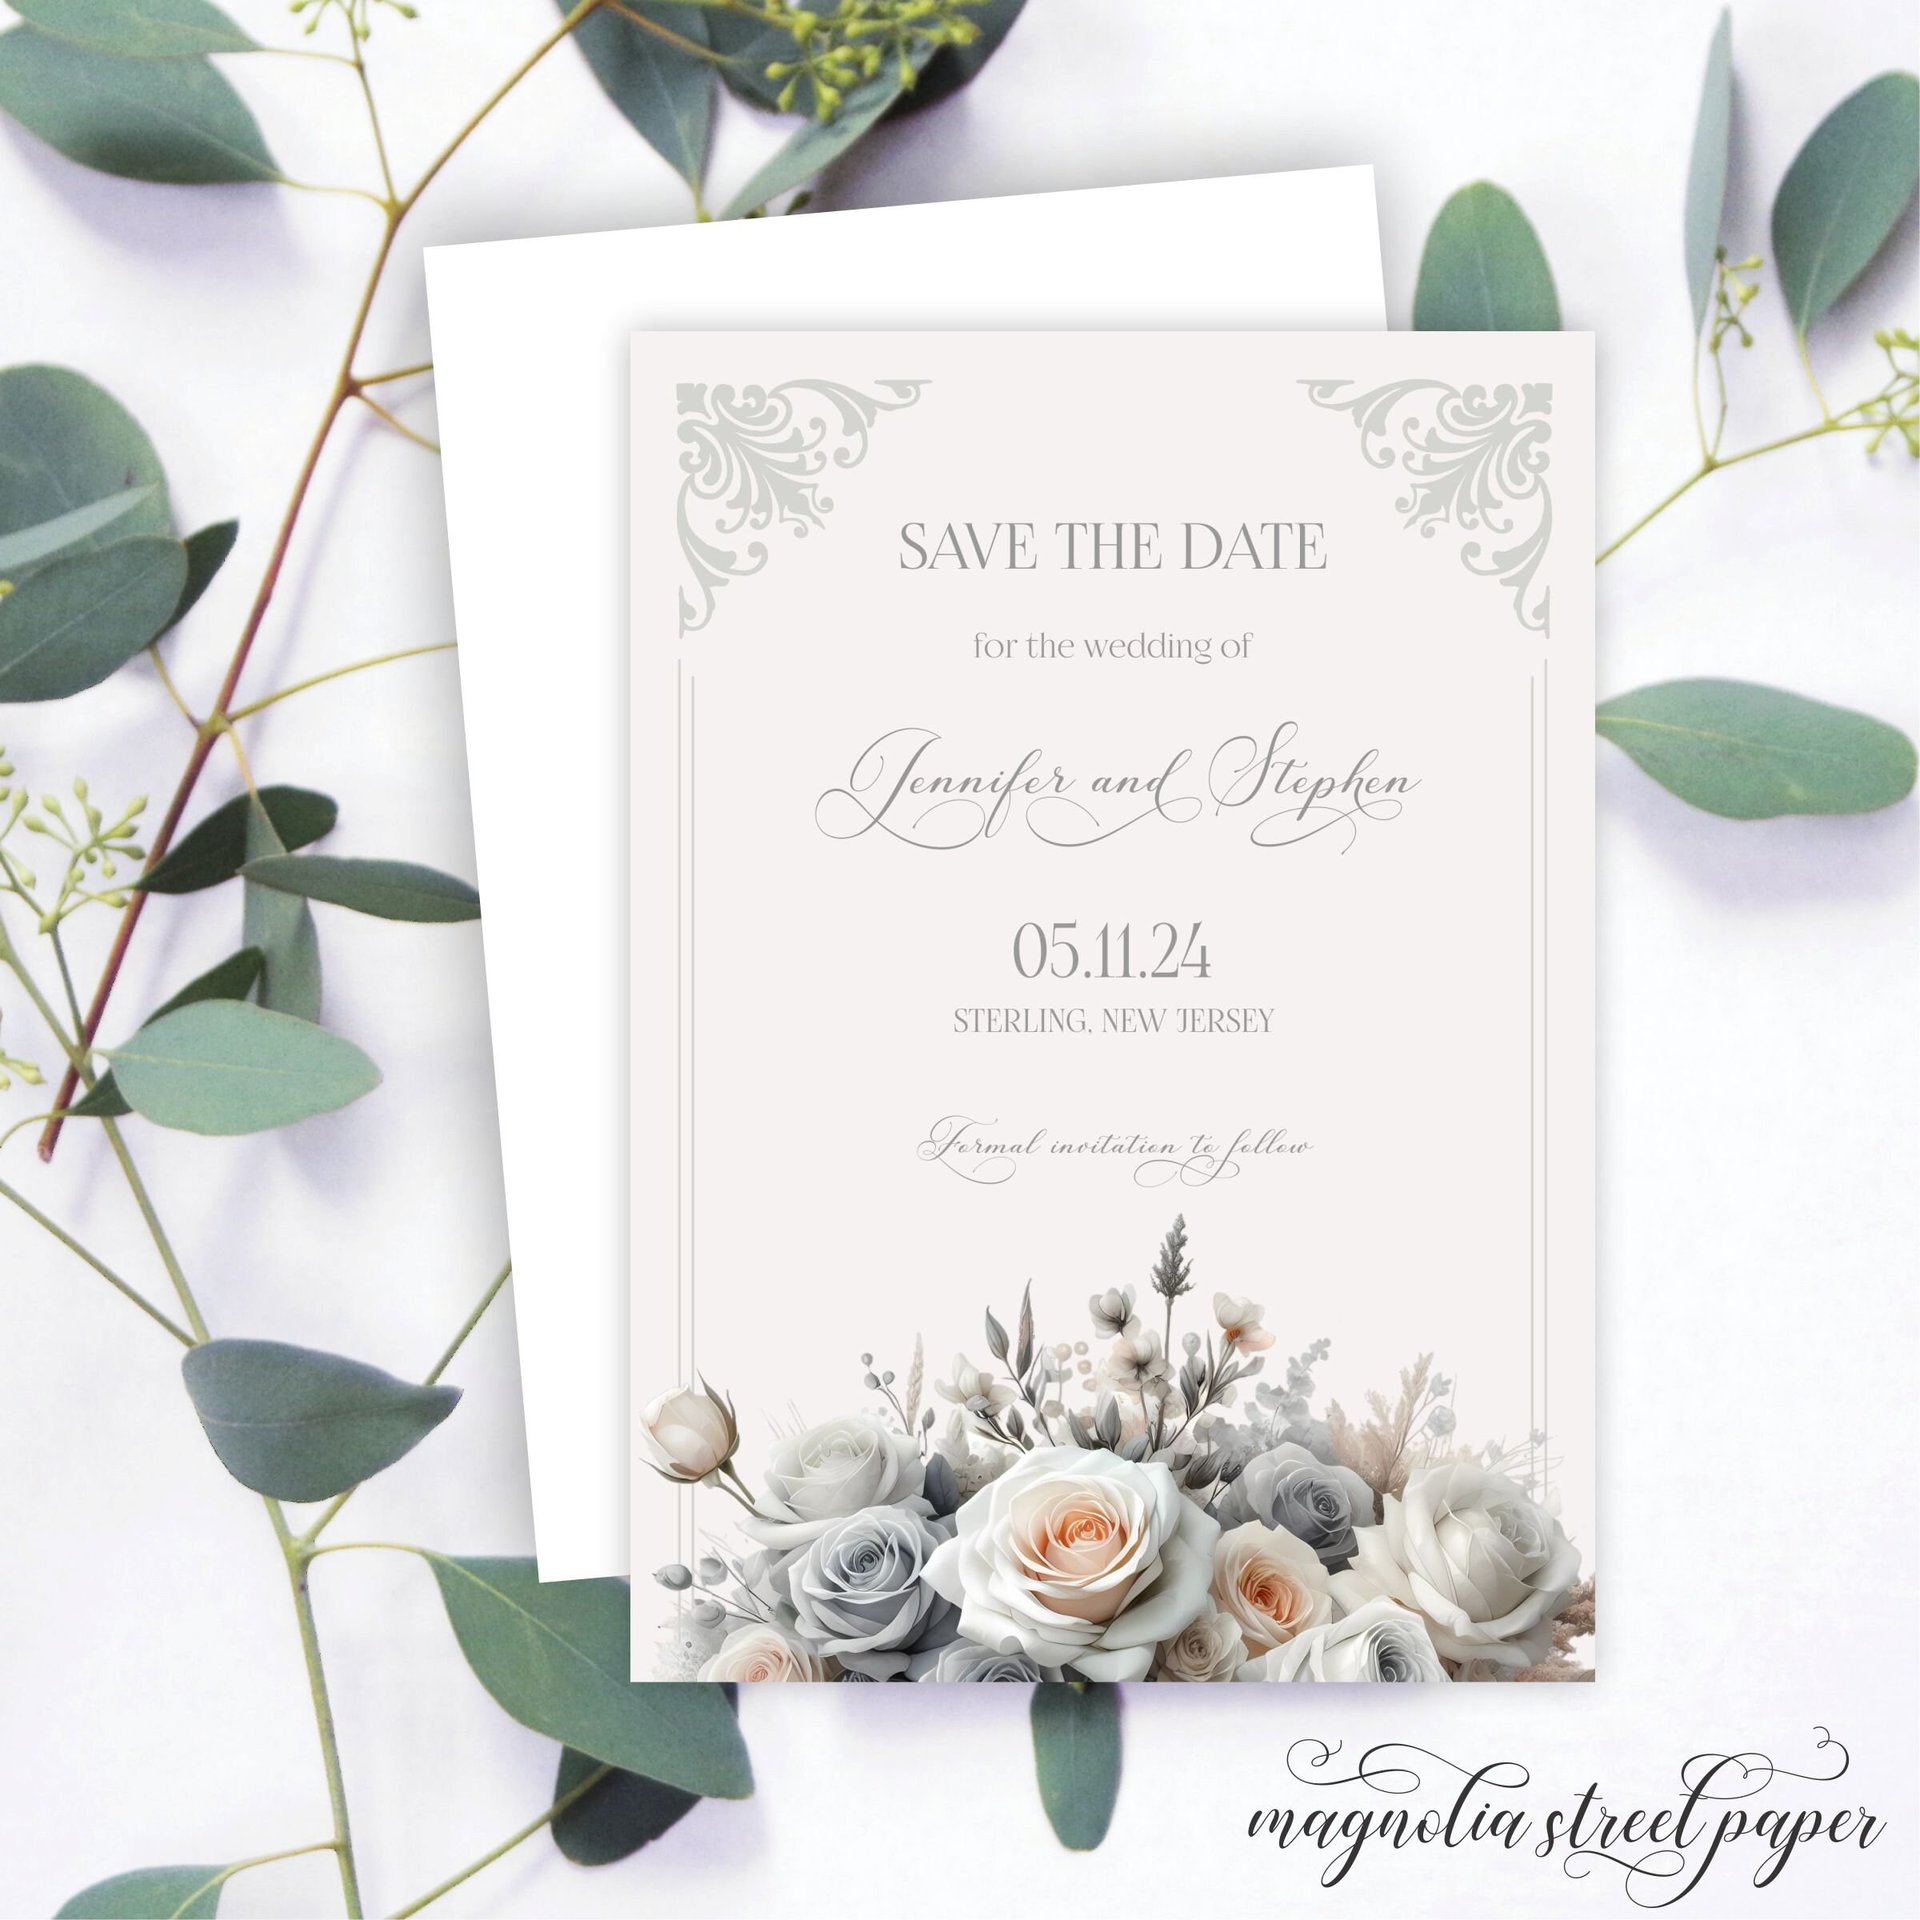 Elegant Vintage Save the Date, Gray, White and Blush Roses